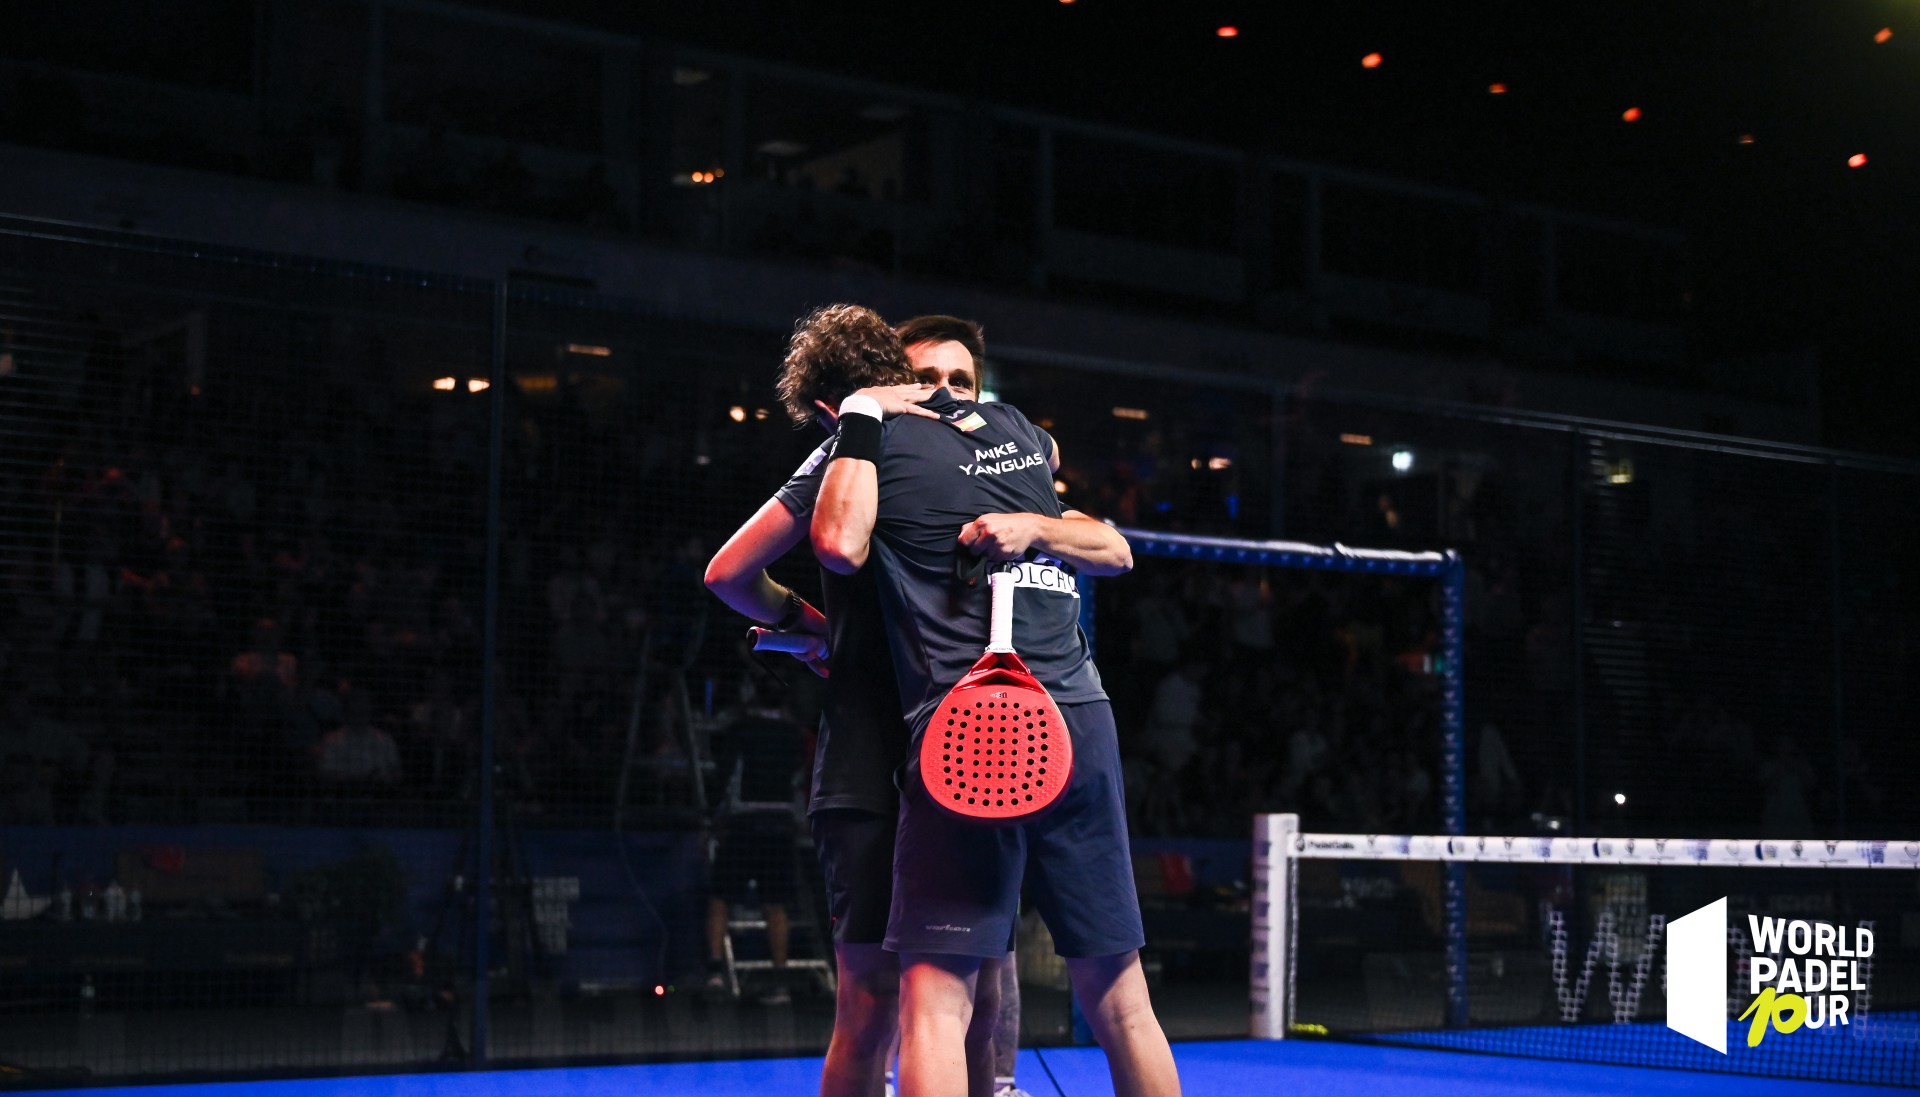 Belasteguin's birthday crowned with first 2023 semifinal!